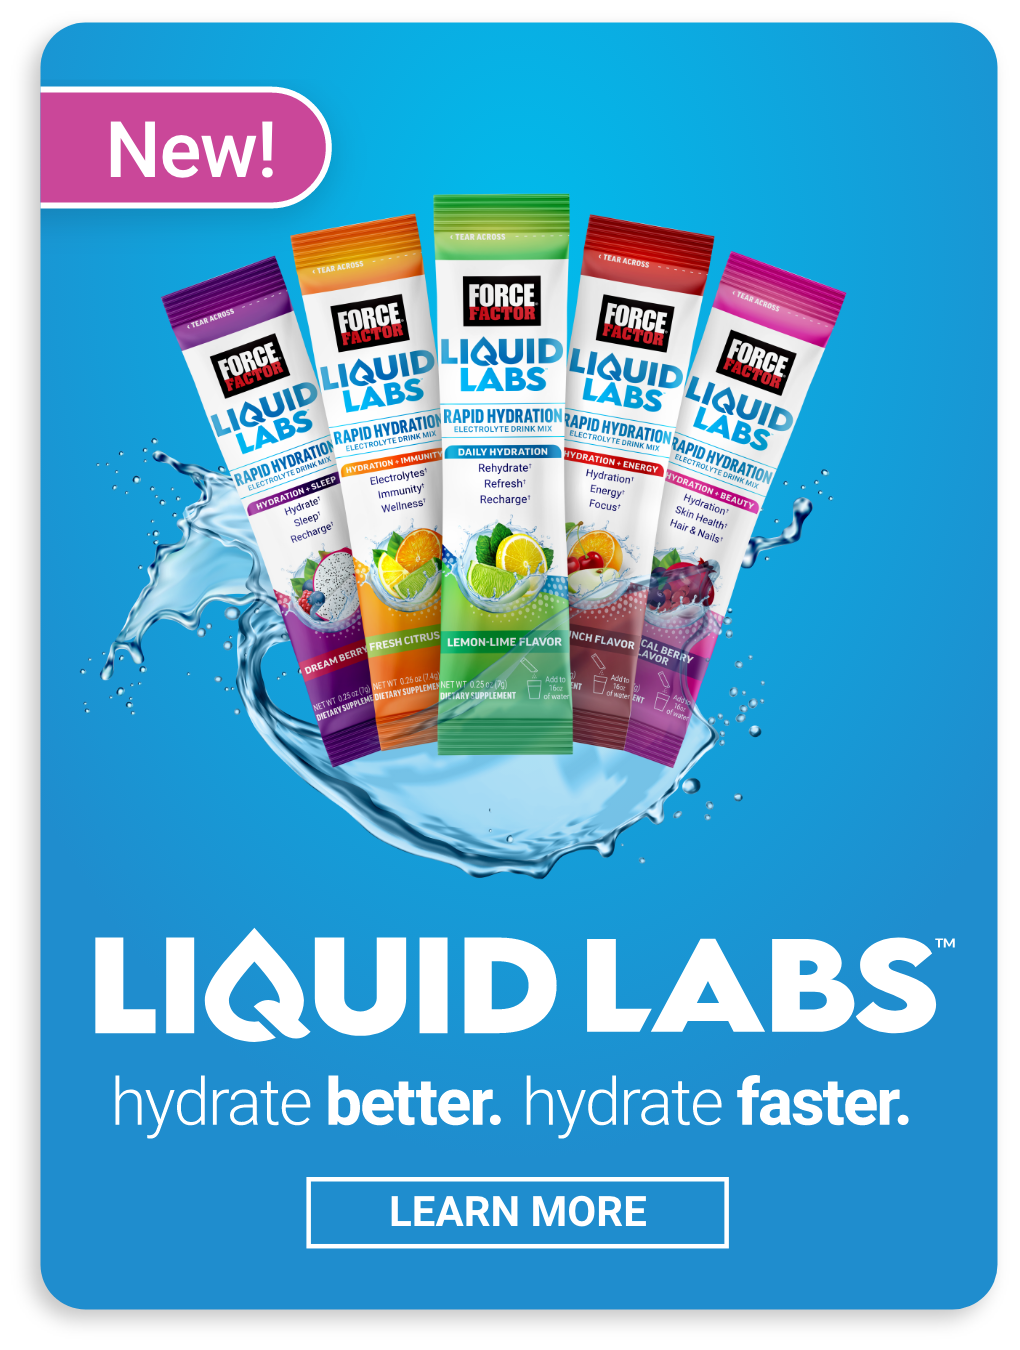 New! Liquid Labs - Learn More